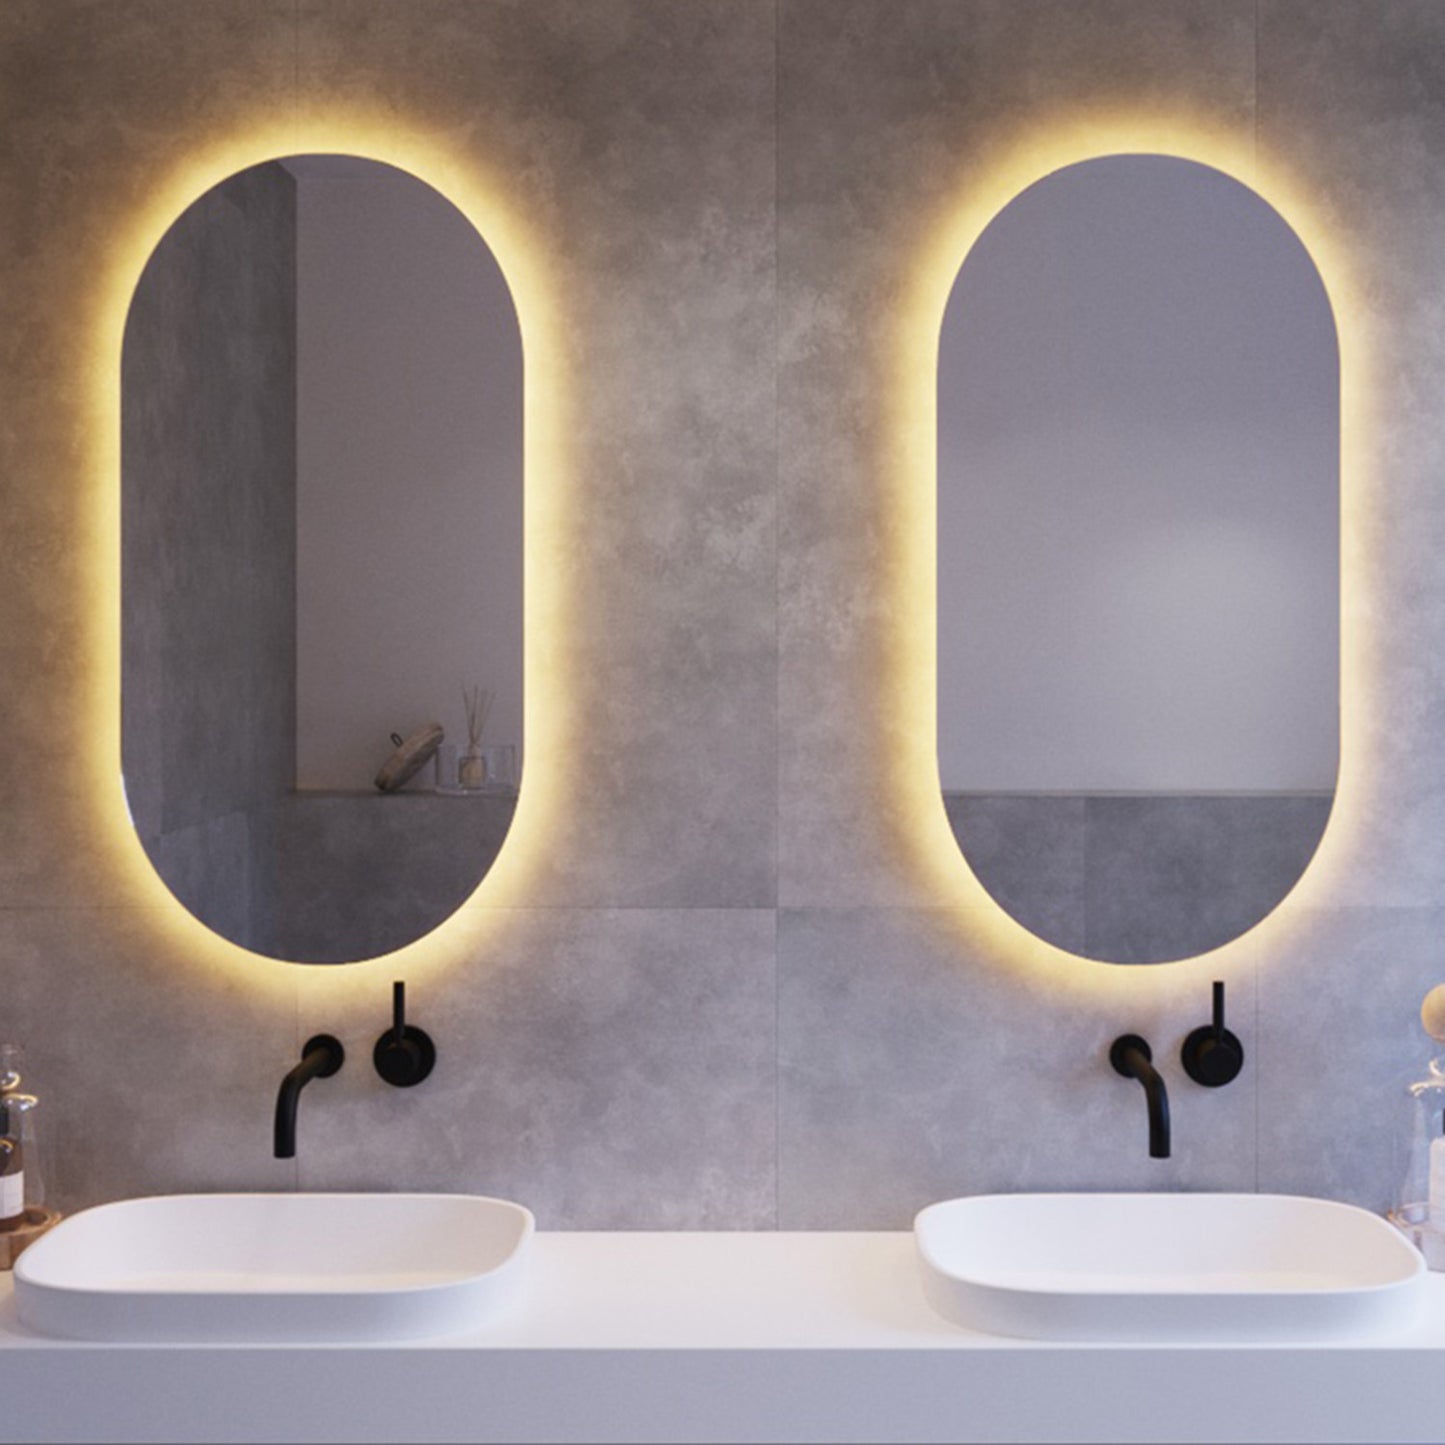 Ablaze Oval Backlit Mirror by Thermogroup - Warm Light